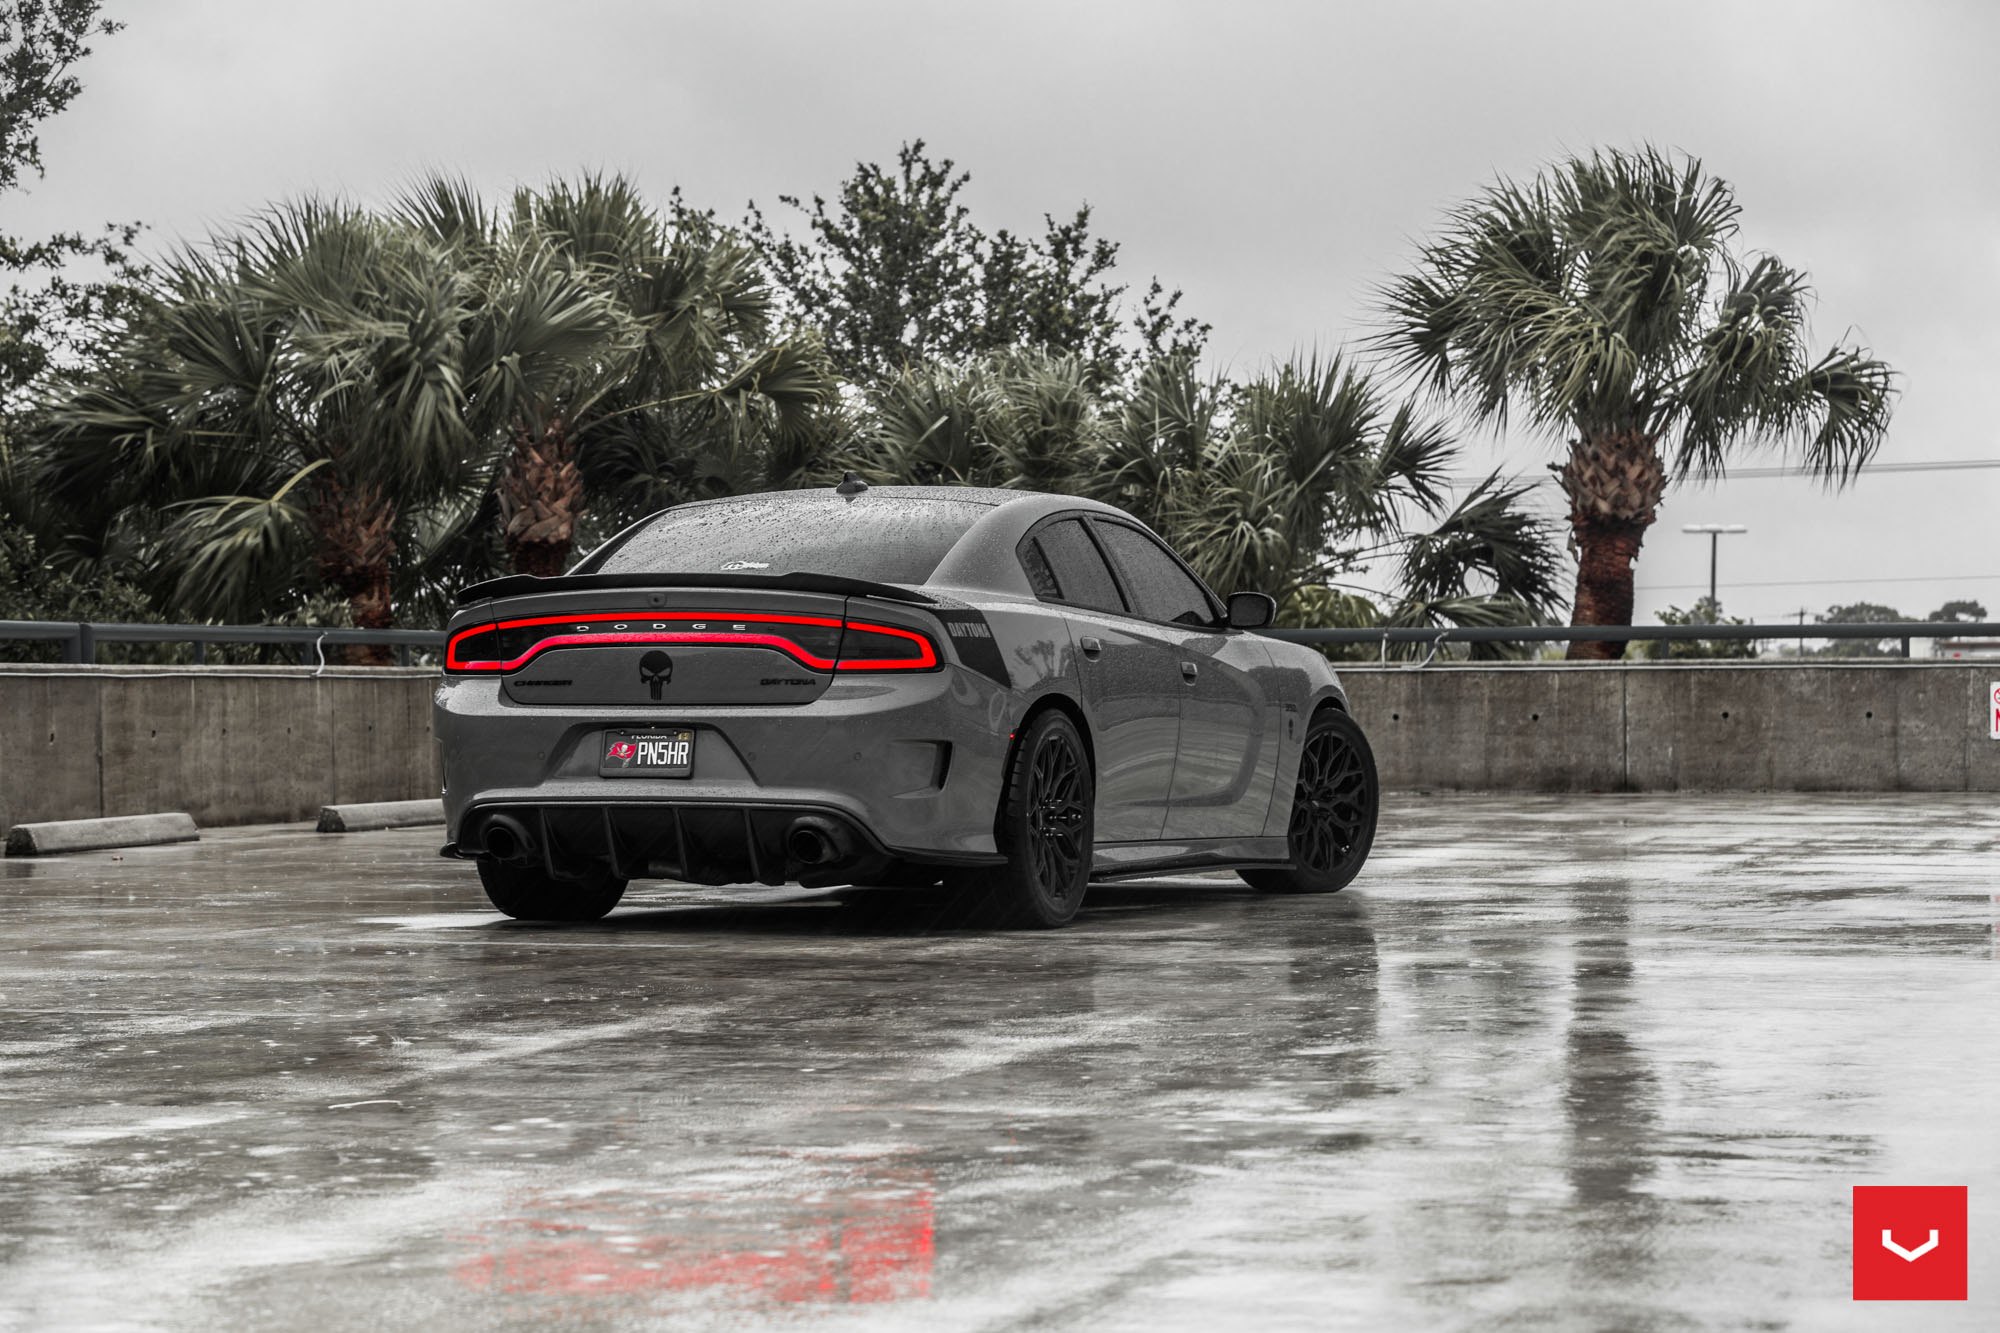 Aftermarket Rear Spoiler on Gray Dodge Charger - Photo by Vossen